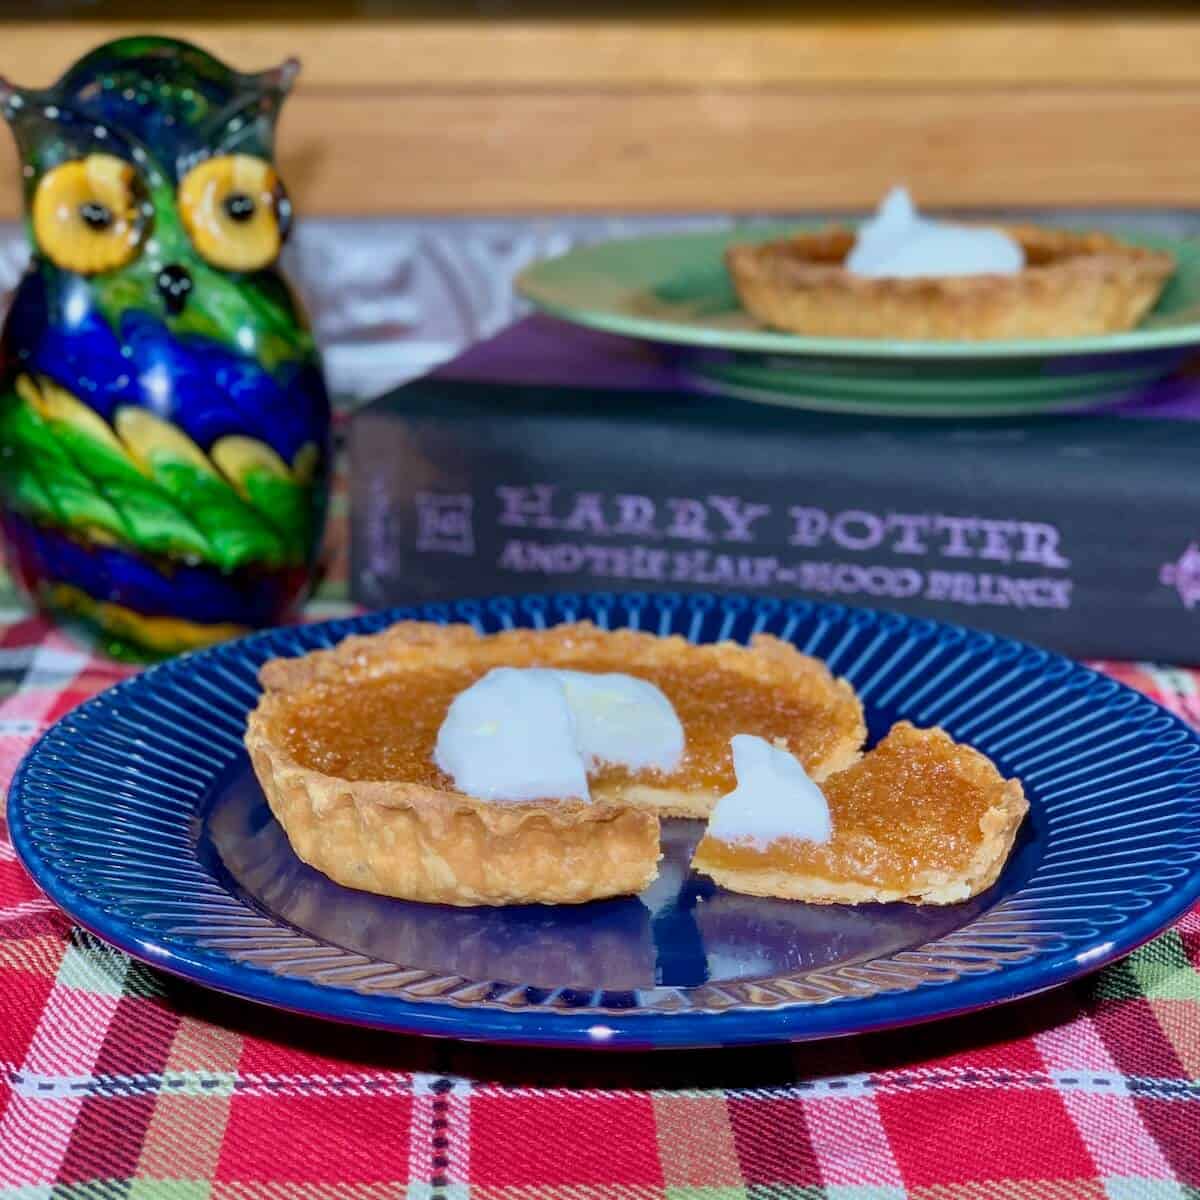 Treacle Tart sliced & plated on blue plate with tart on green plate on book & glass owl in background.